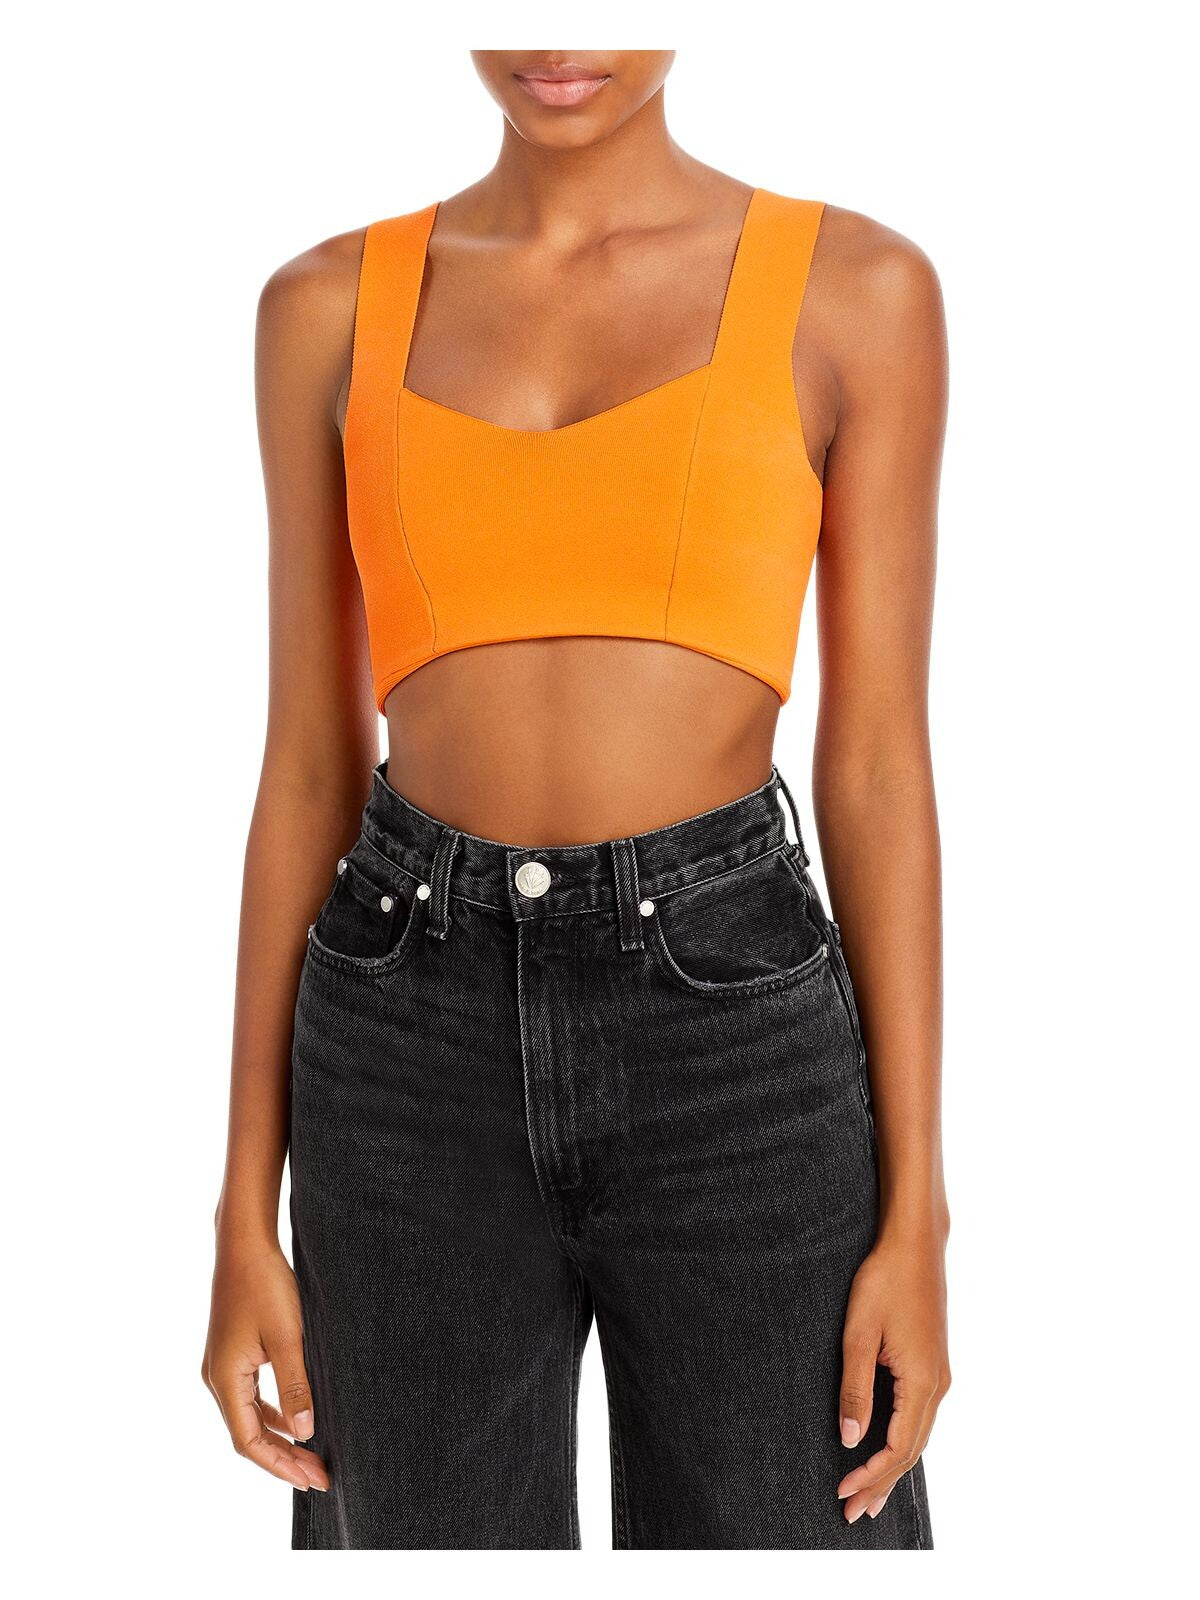 A.L.C. Womens Orange Textured Fitted Square Back Pullover Sleeveless Sweetheart Neckline Crop Top XL